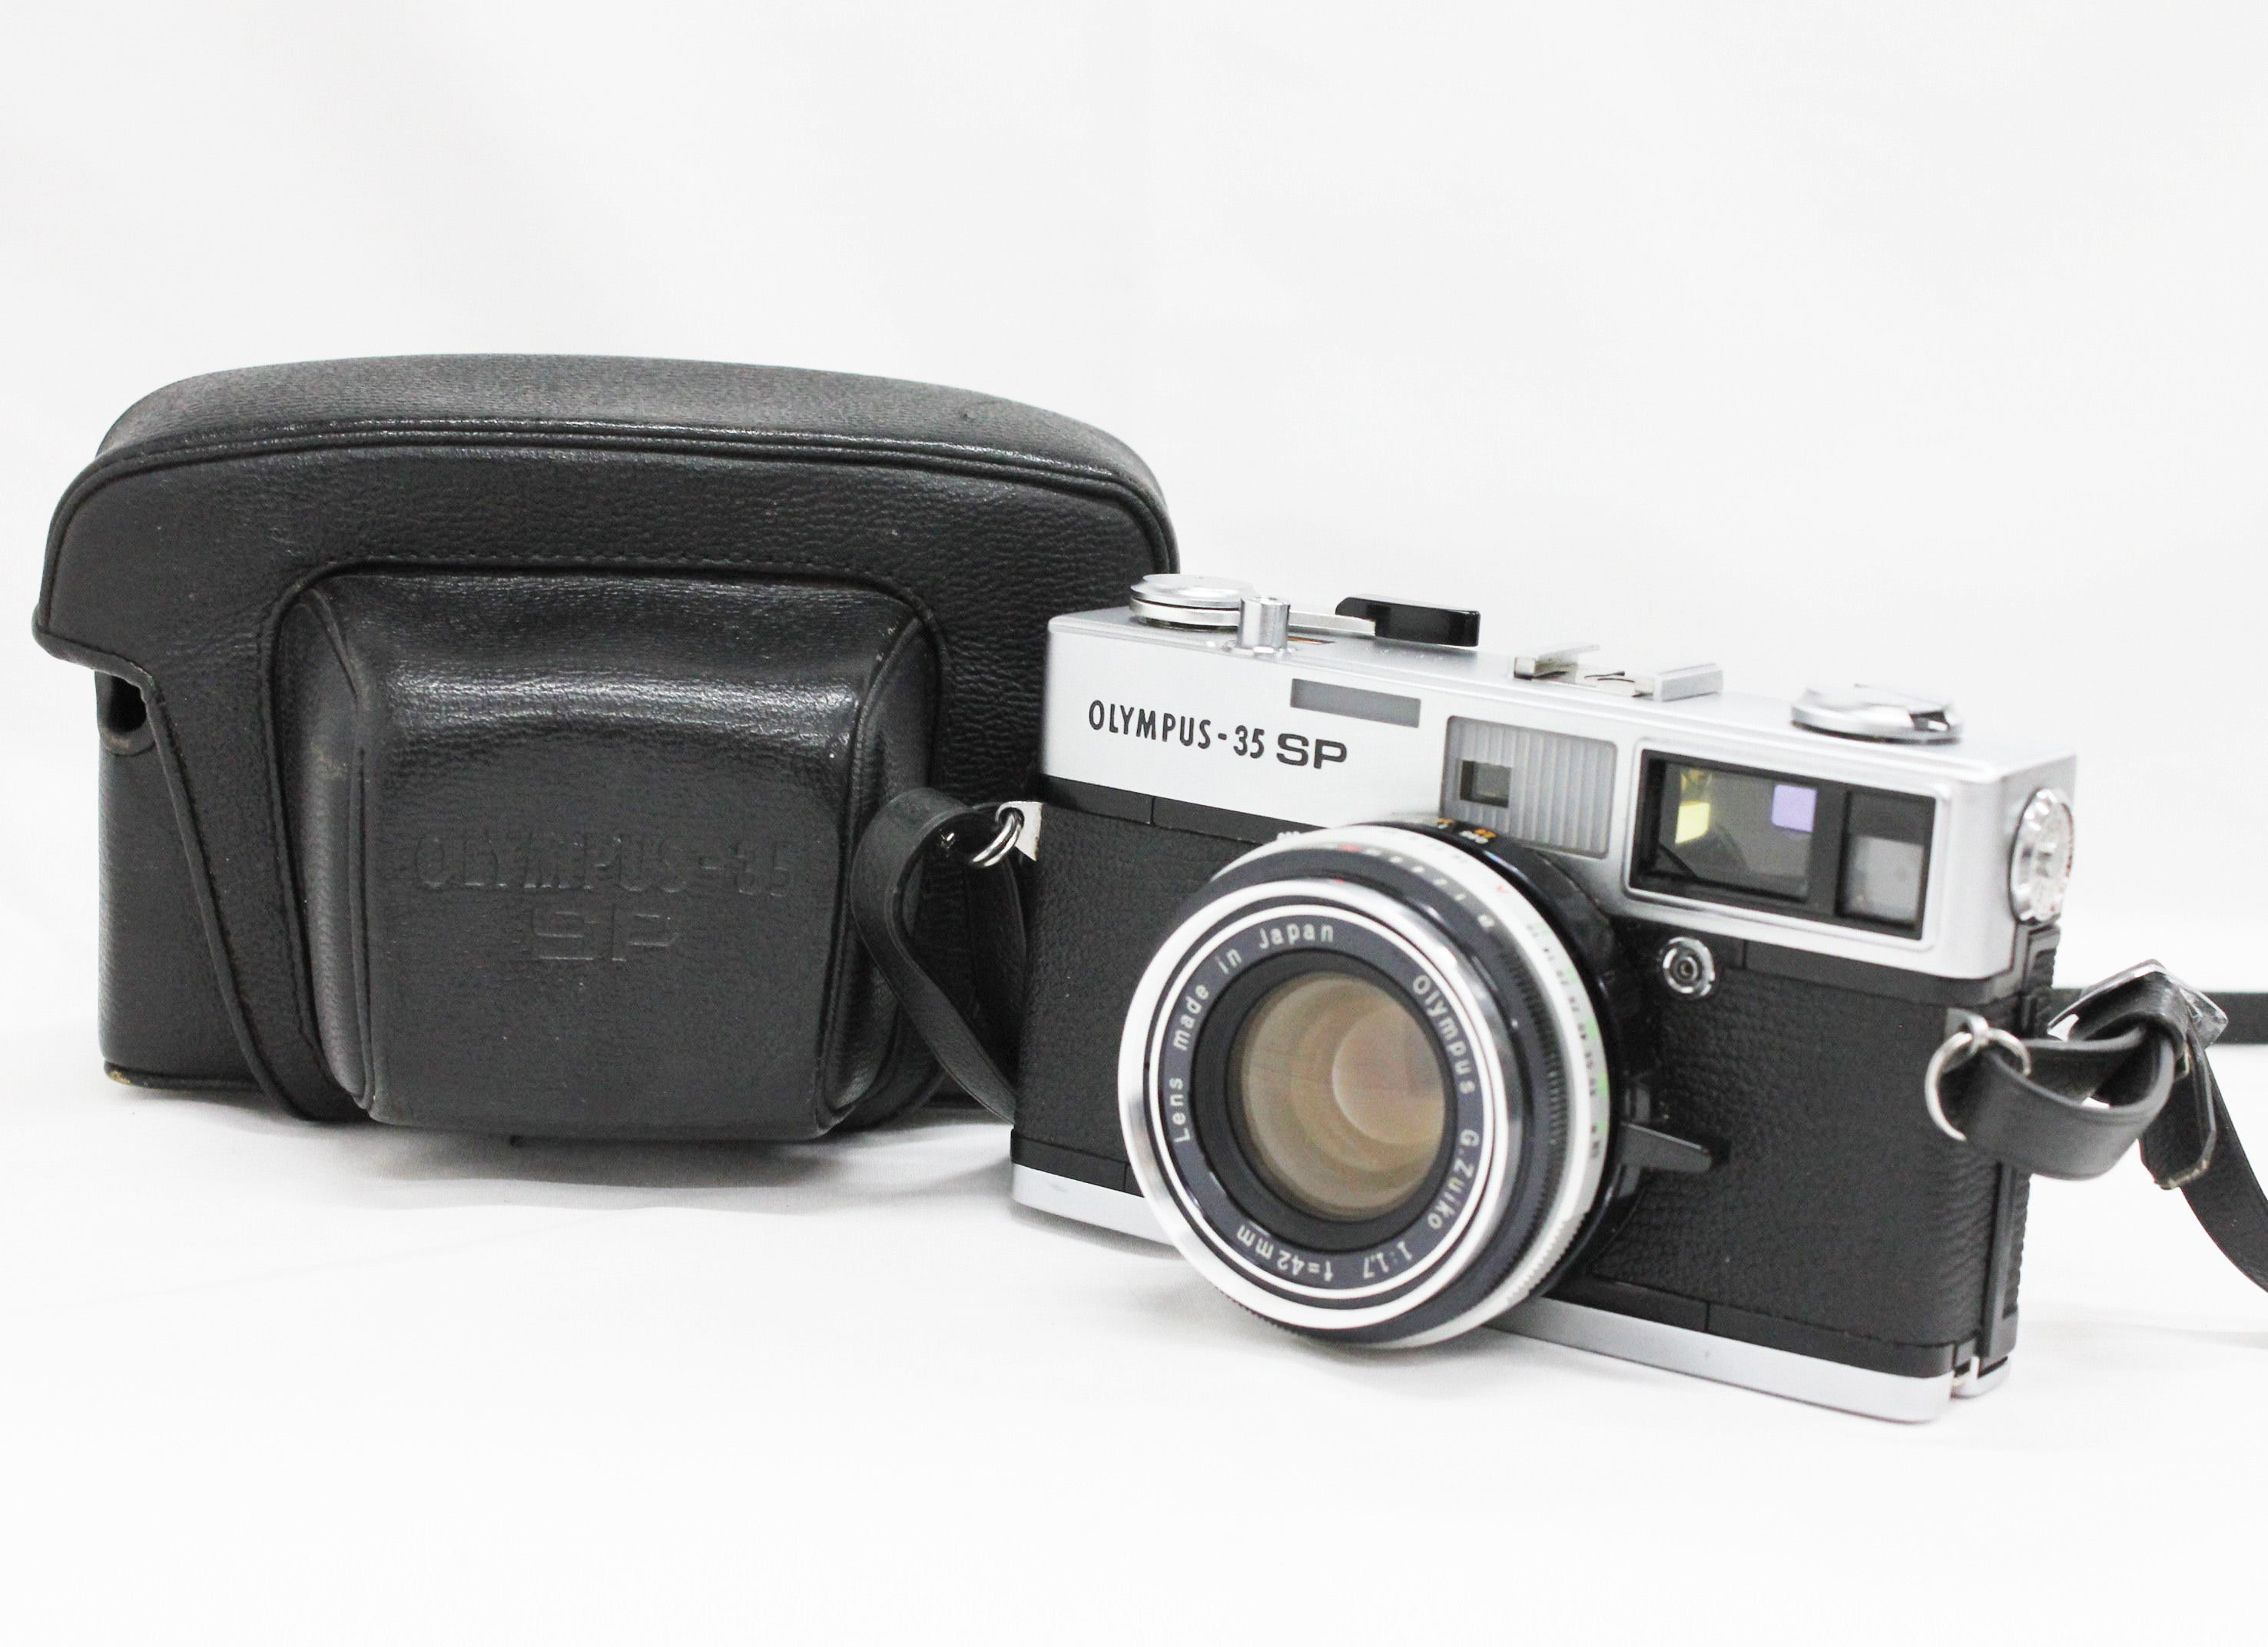 [Excellent++++] Olympus 35 SP 35mm Rangefinder Film Camera with G.Zuiko 42mm F1.7 Lens from Japan